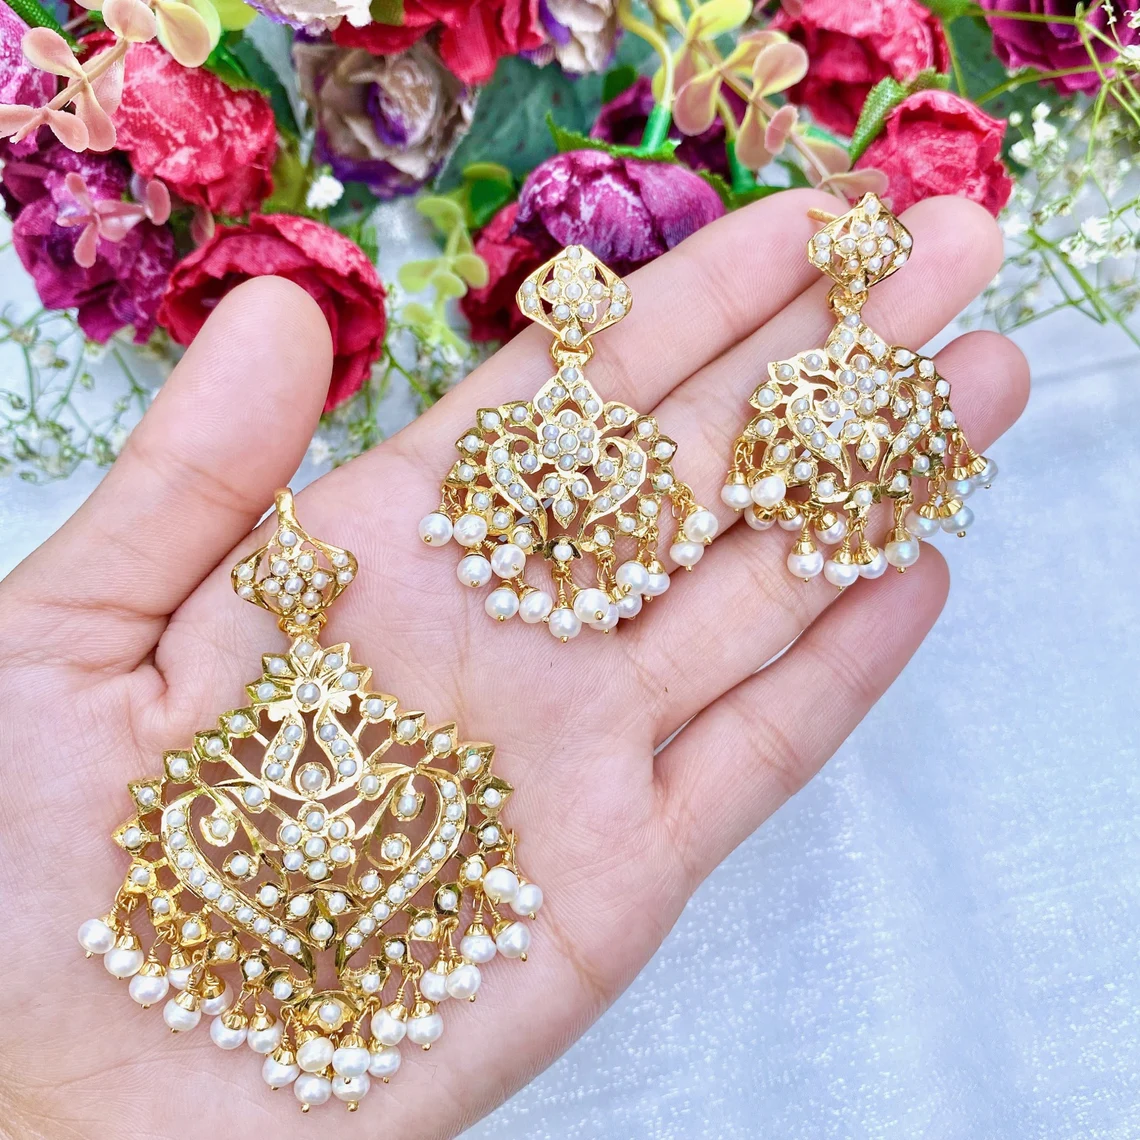 mughal pearl pendant set on the hand